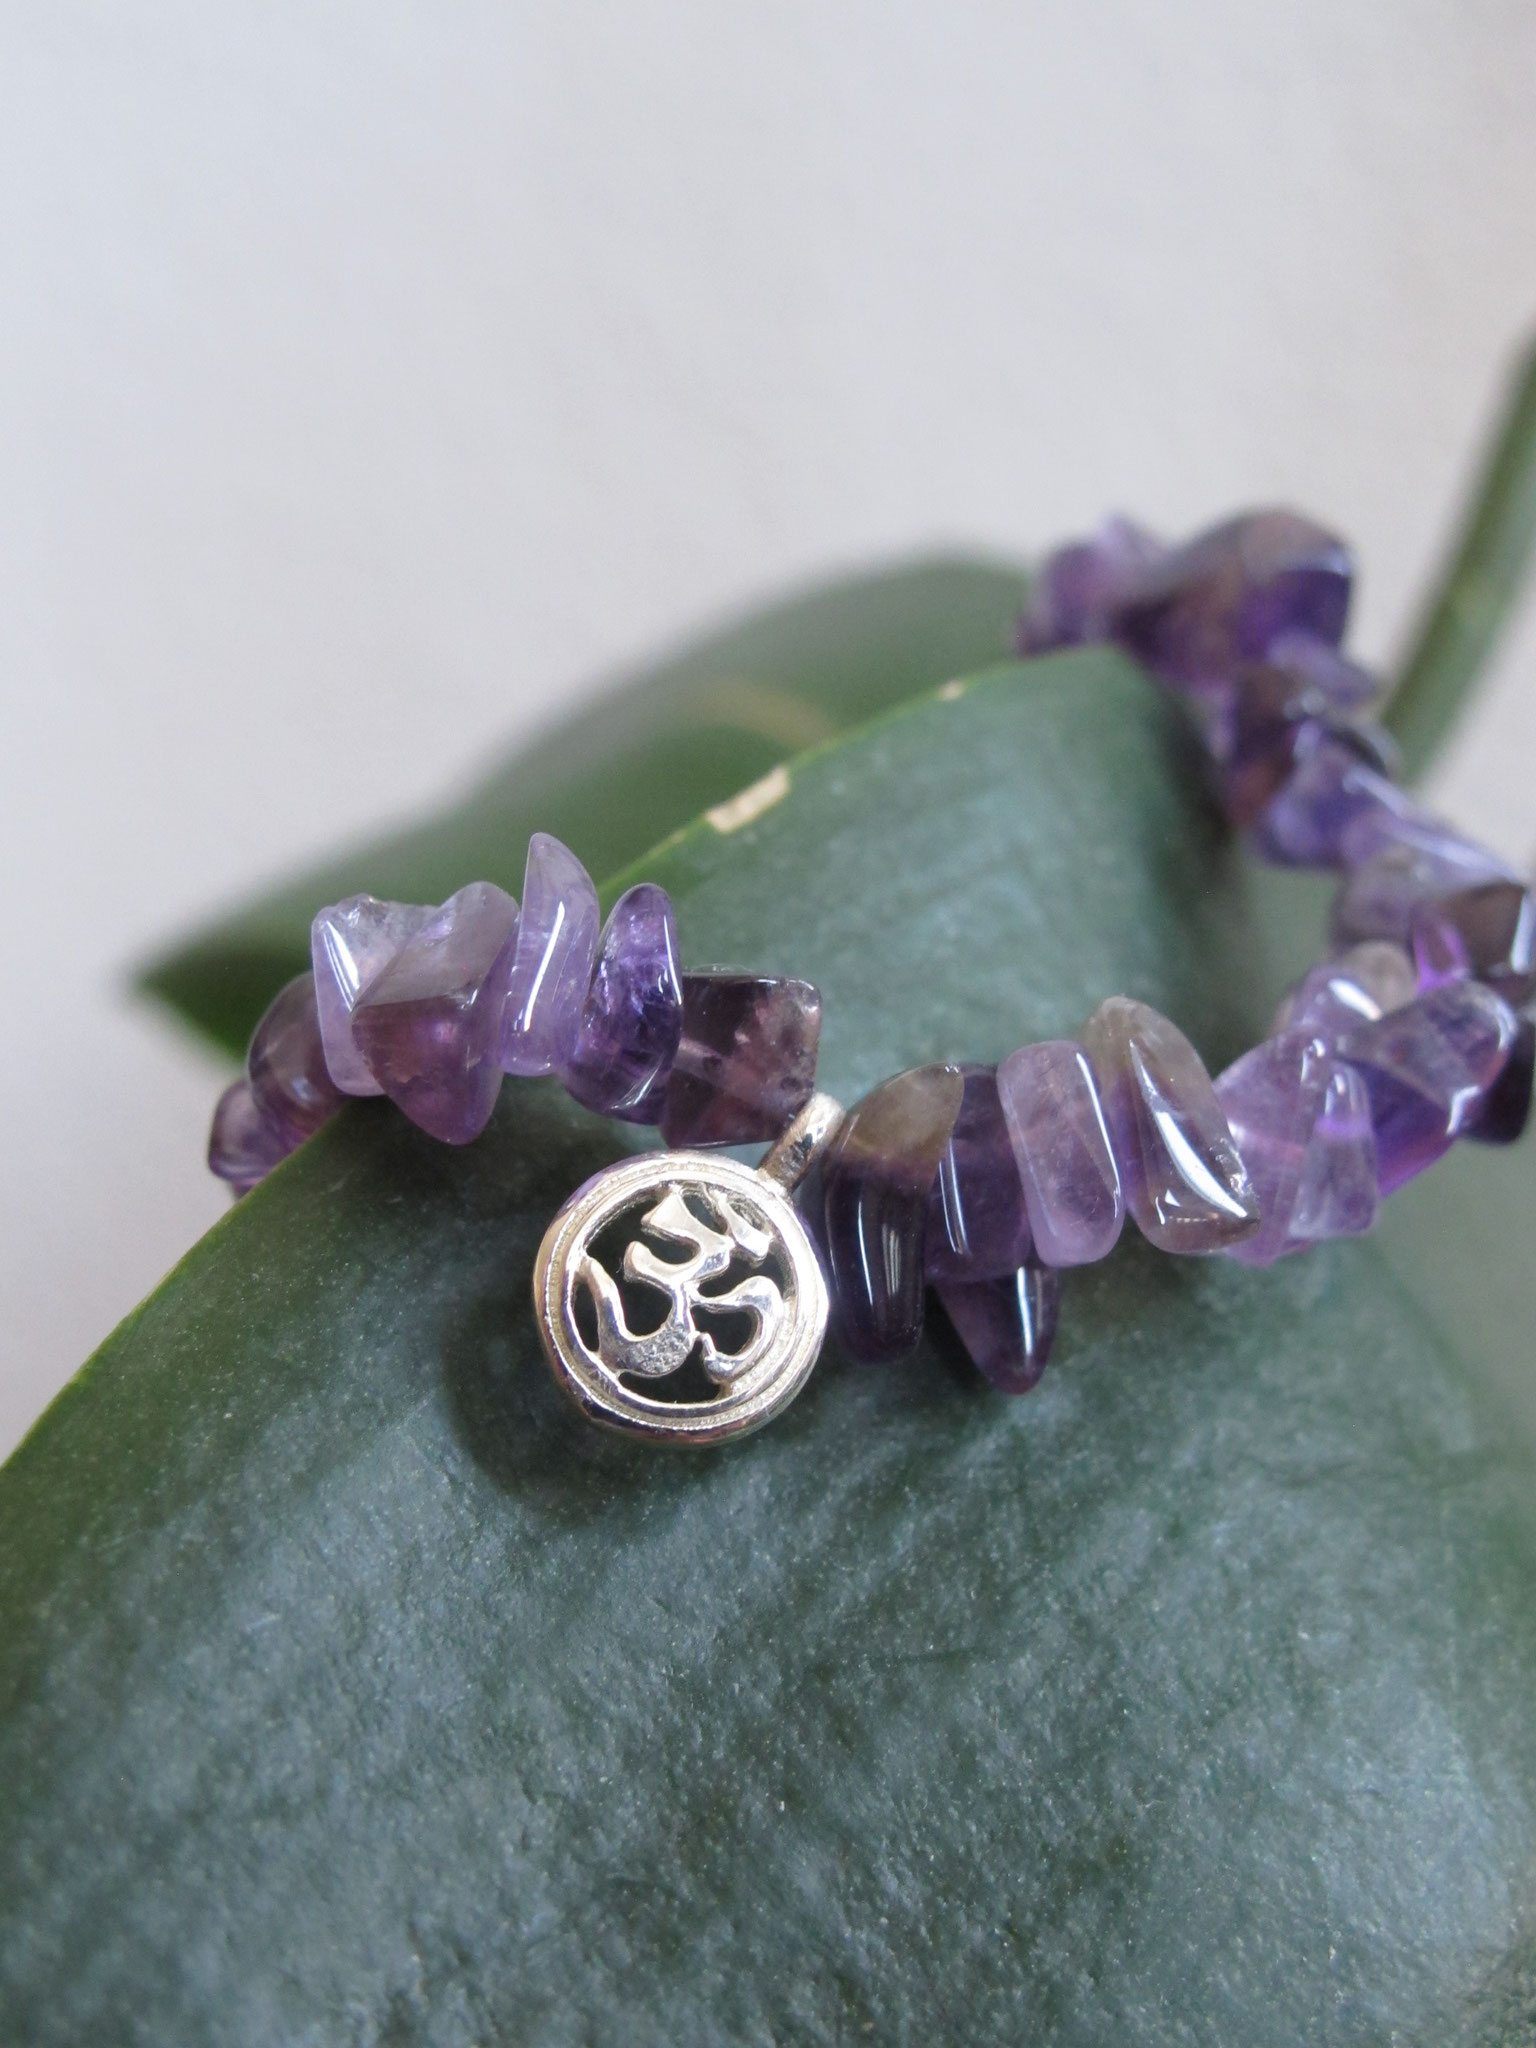 Chips of amethyst with a 925 Sterling silver "OM" charm (sold)